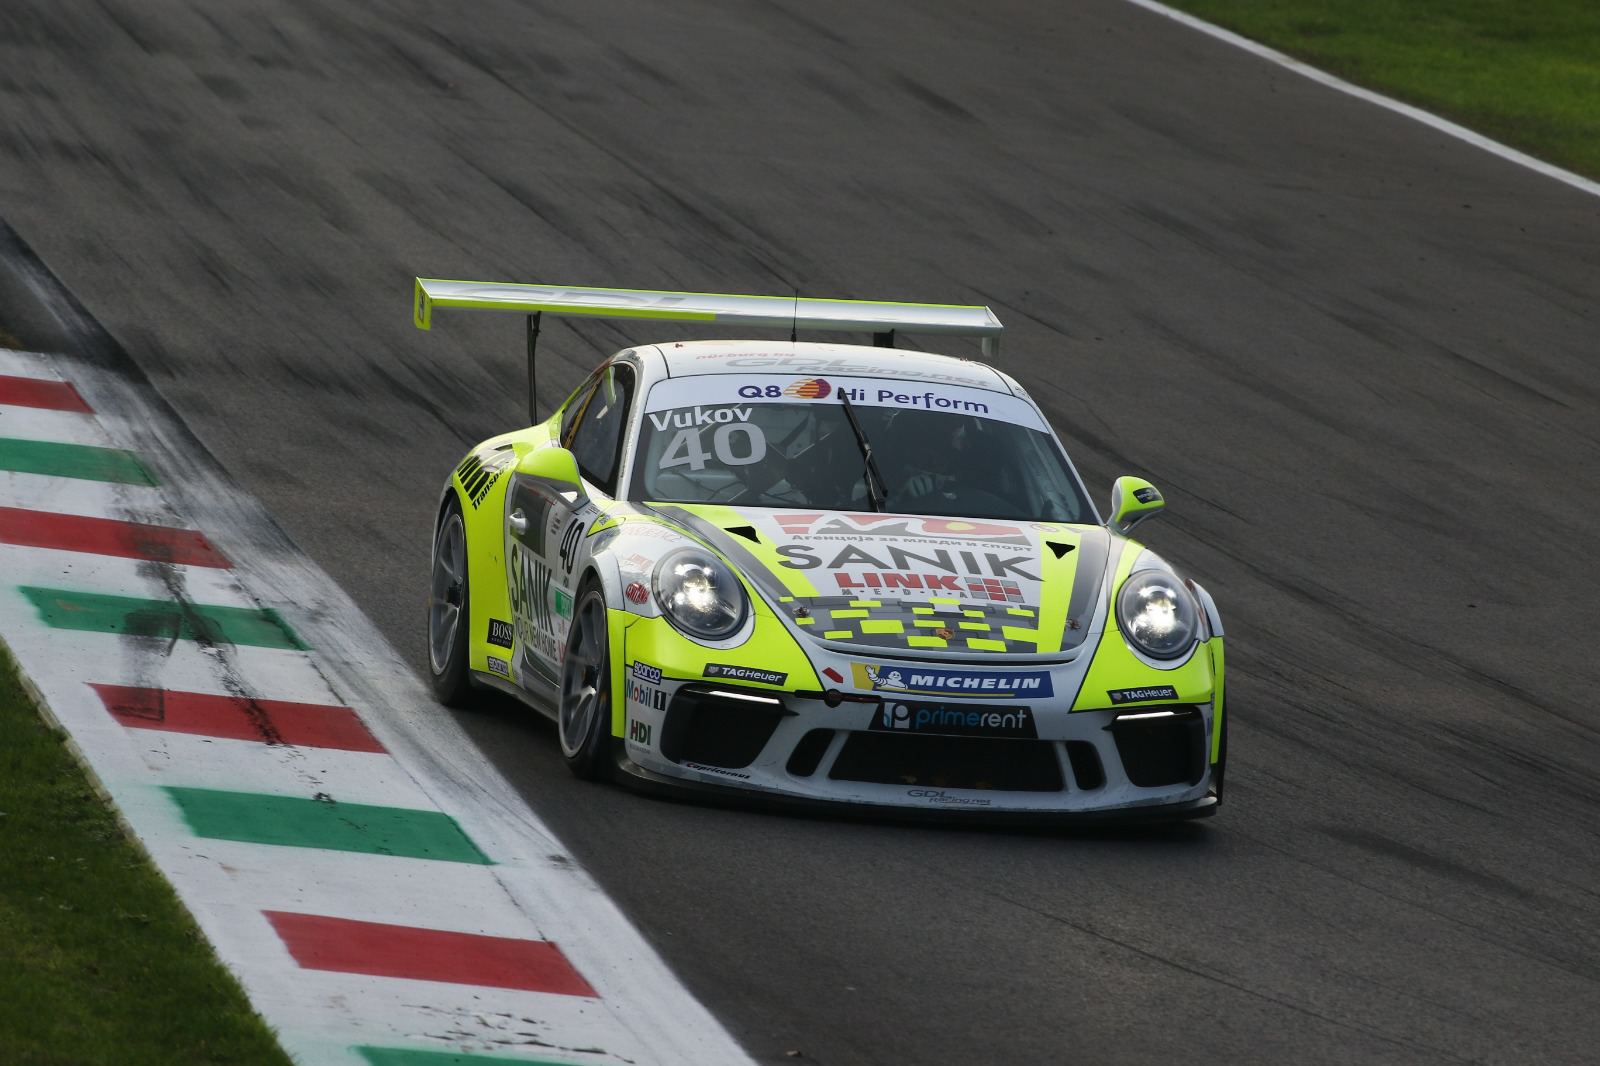 GDL Racing ends on a high the Carrera Cup Italia season at Monza